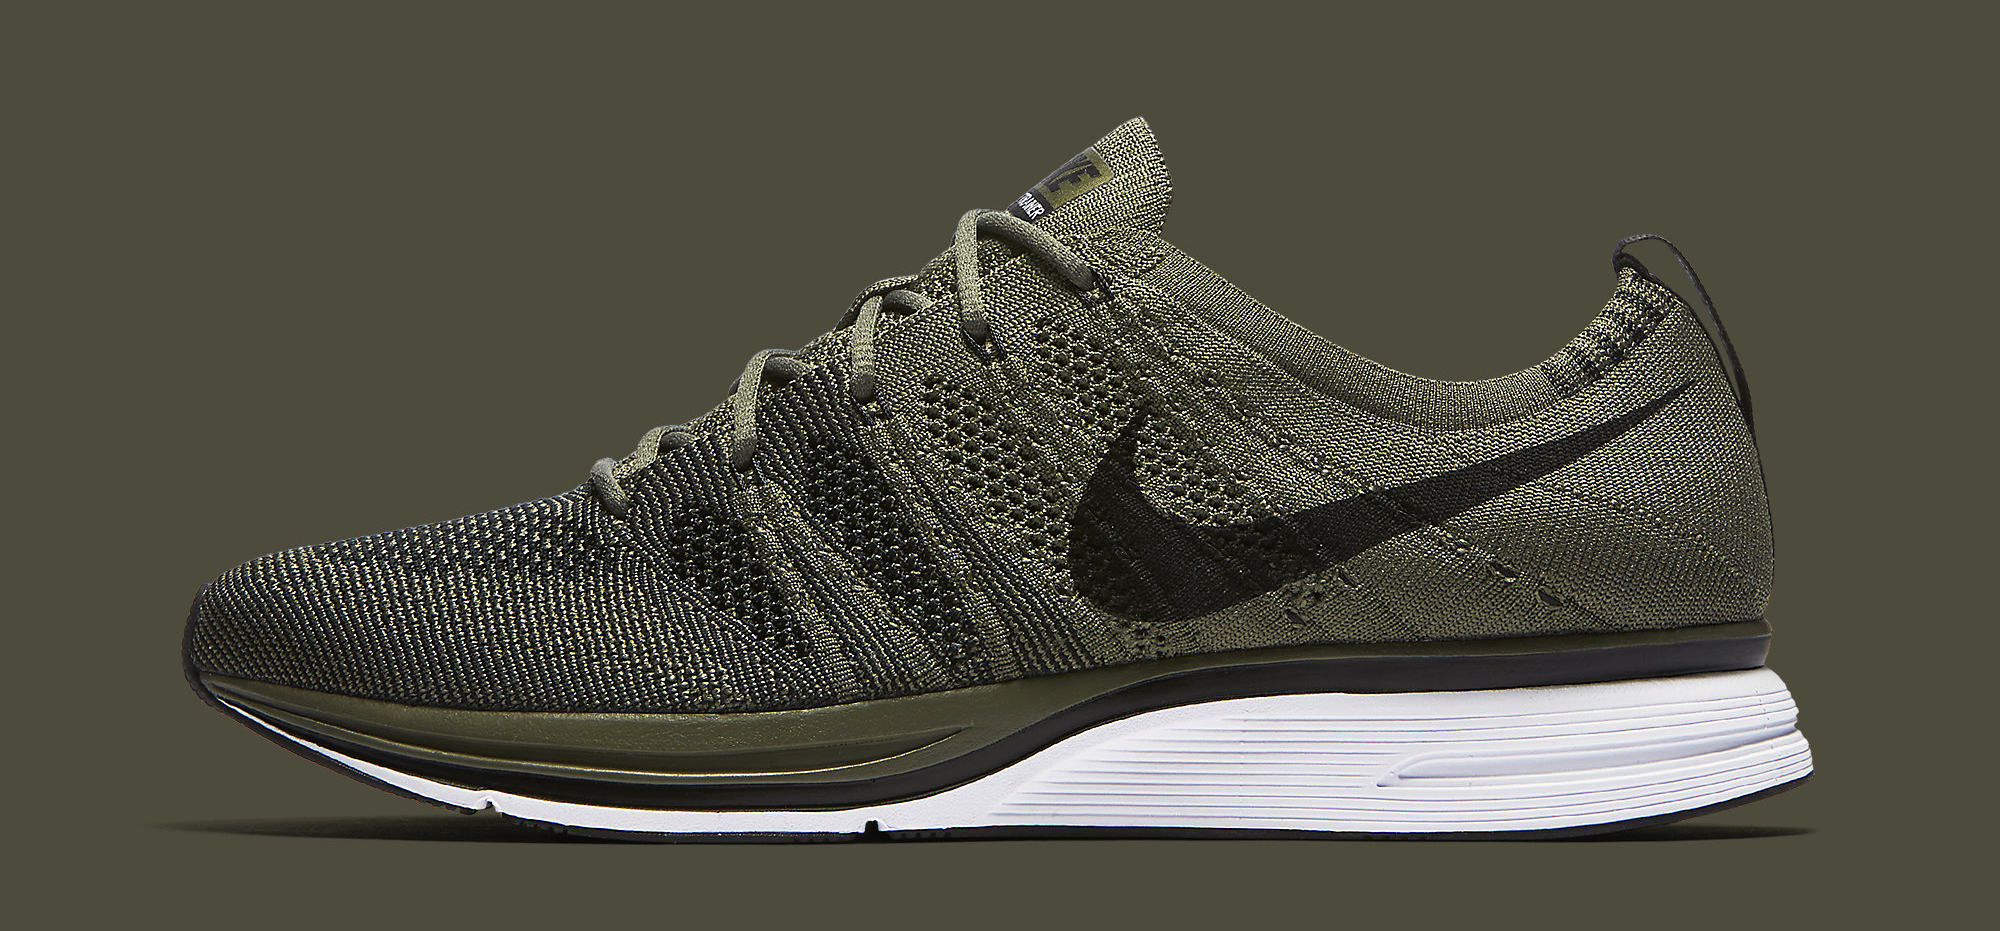 Nike Flyknit Trainer Olive AH8396 200 Profile